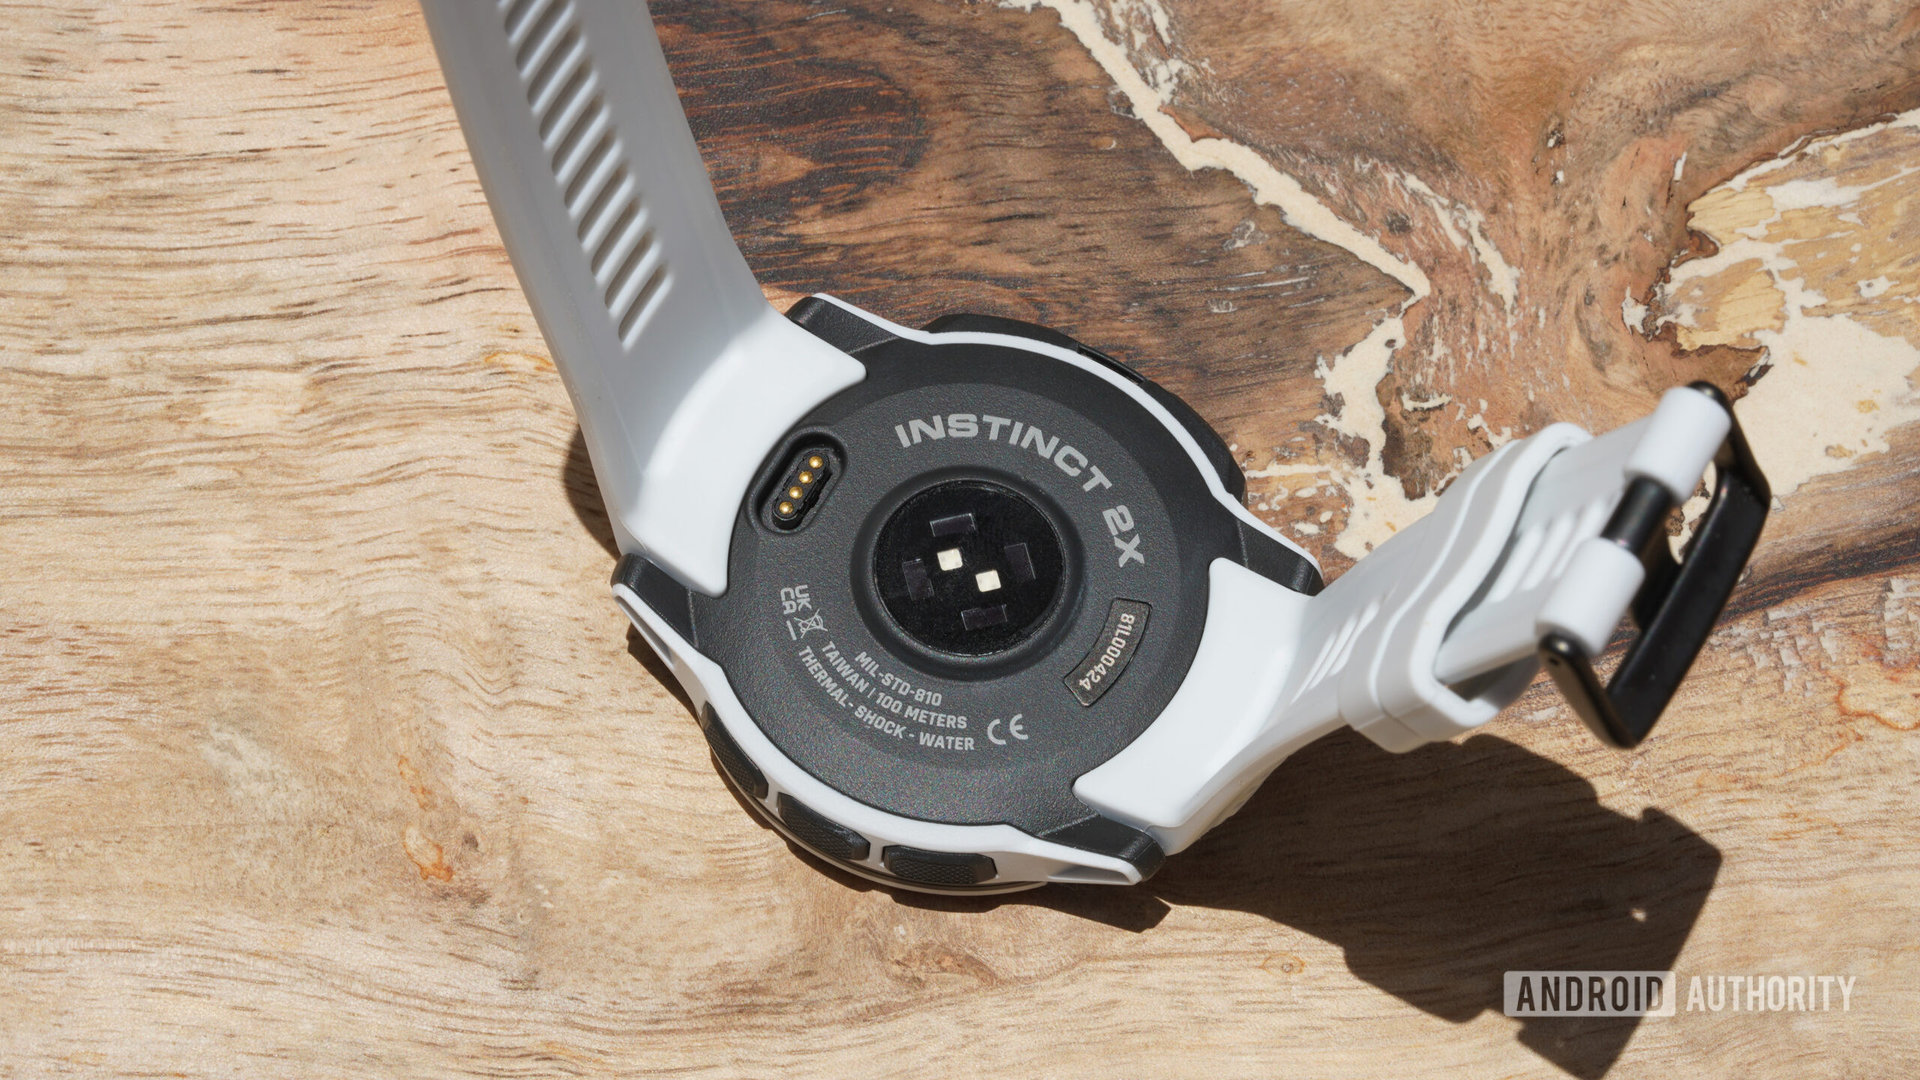 A Garmin Instinct 2X rests face down displaying its heart rate monitor.